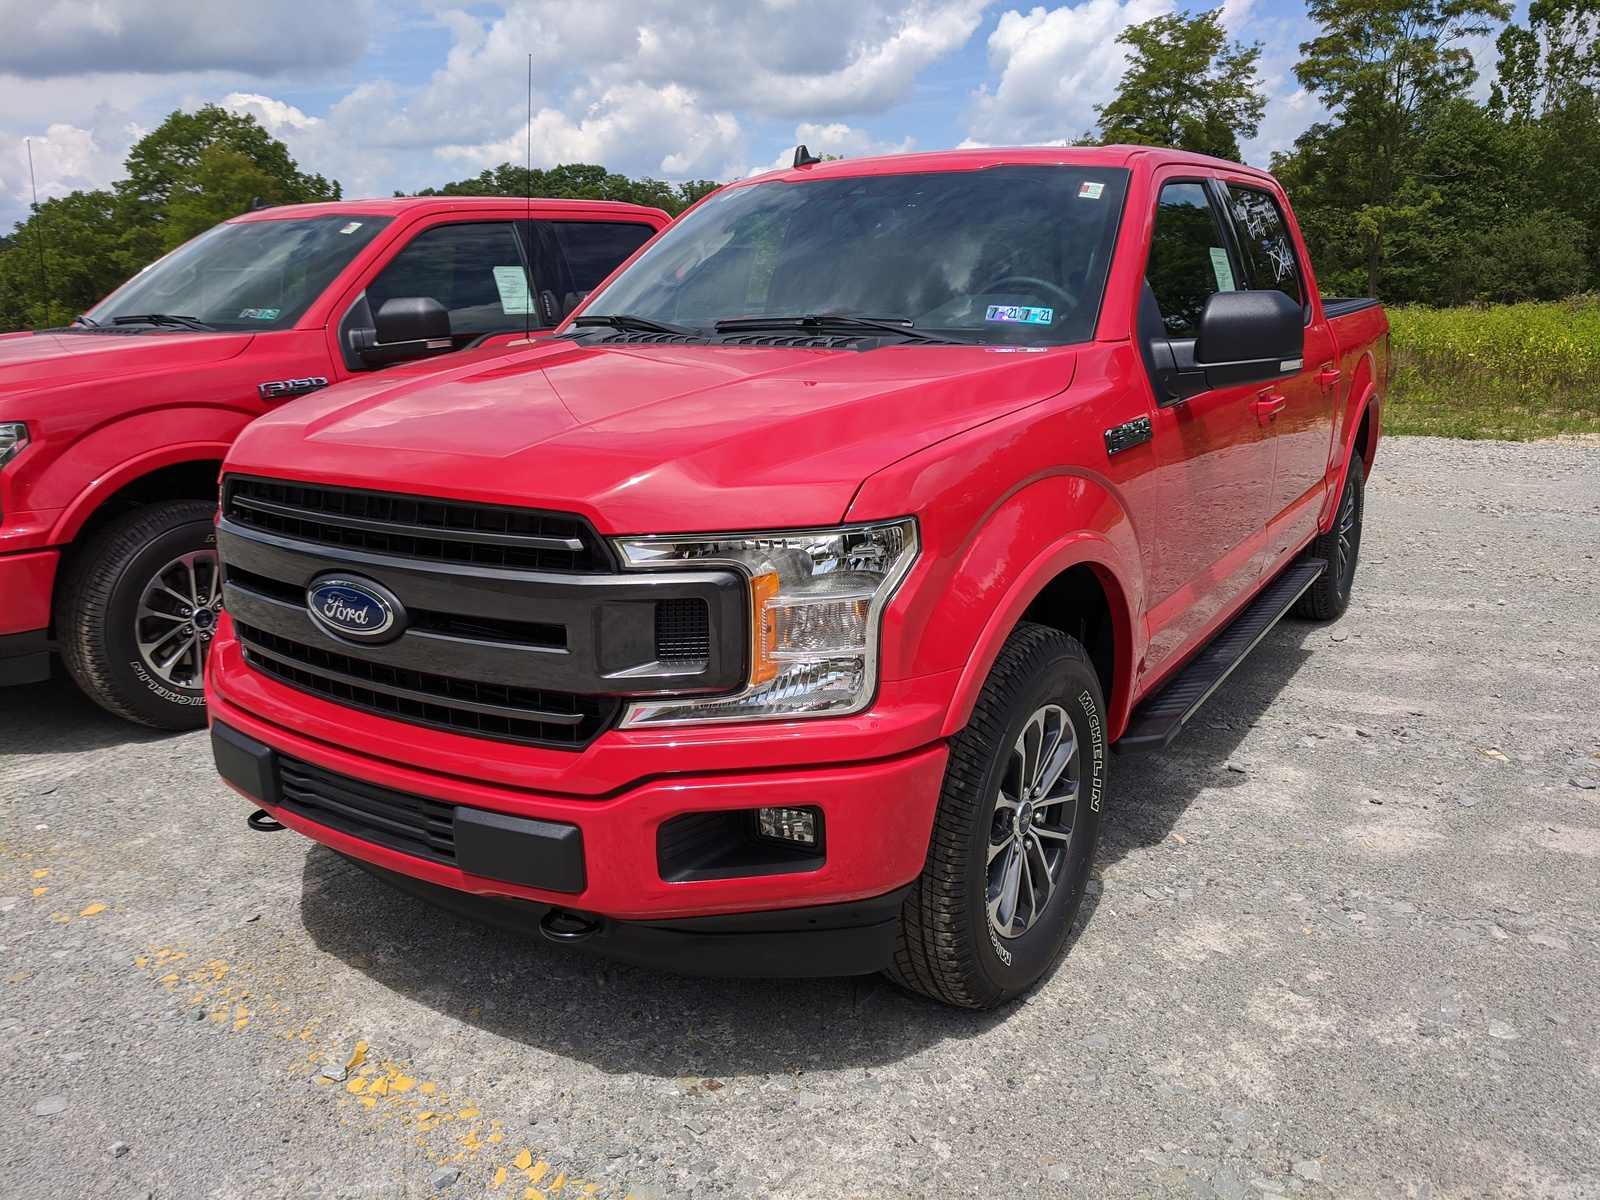 New 2022 Ford F-150 Crew Cab Concept, Towing Capacity ...